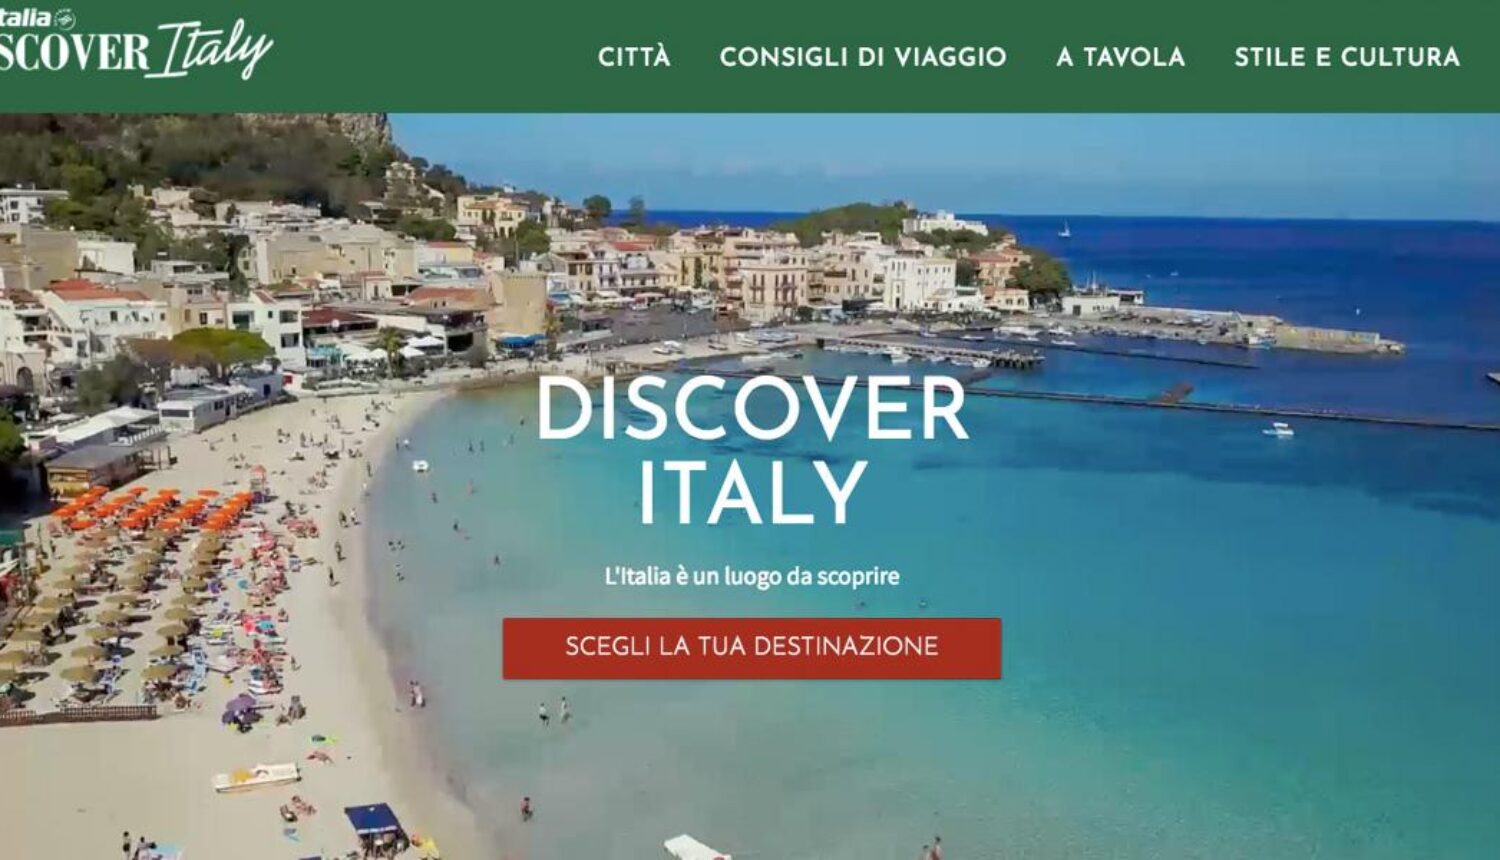 “Discover Italy”, a new project by SHADO